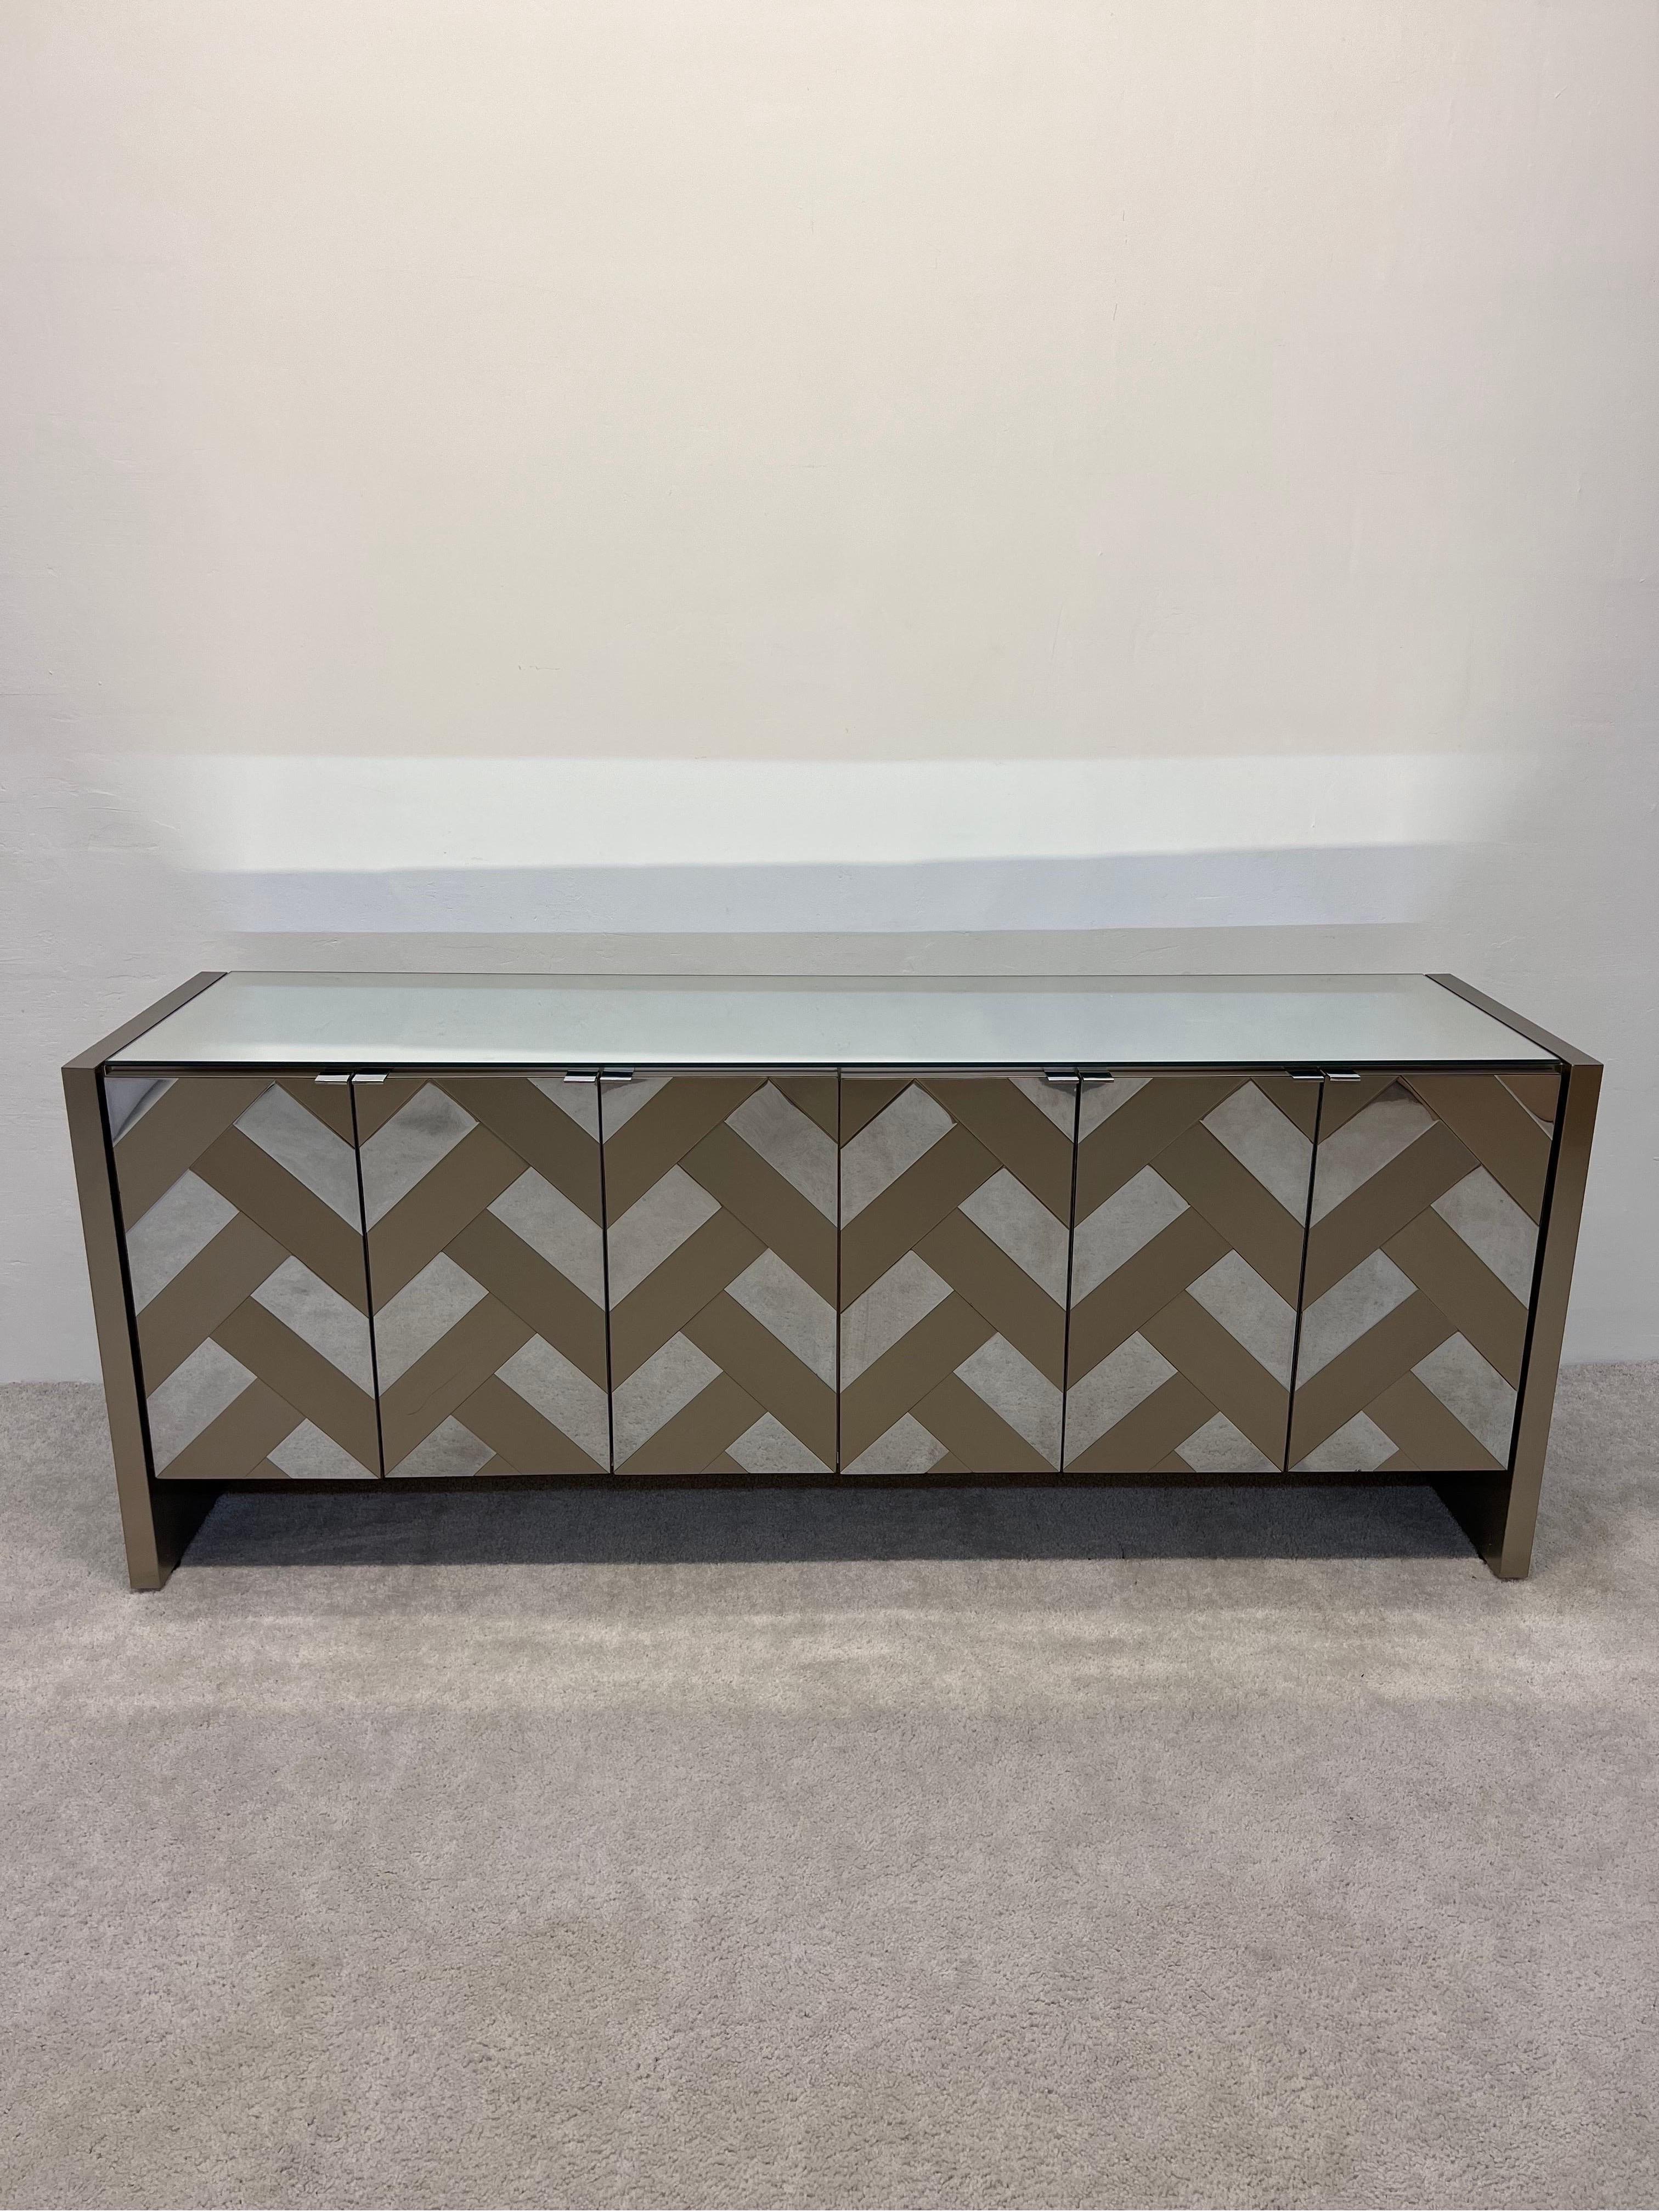 Herringbone patterned chrome and bronze finish credenza or sideboard with mirror top buy Ello Furniture, 1970s.